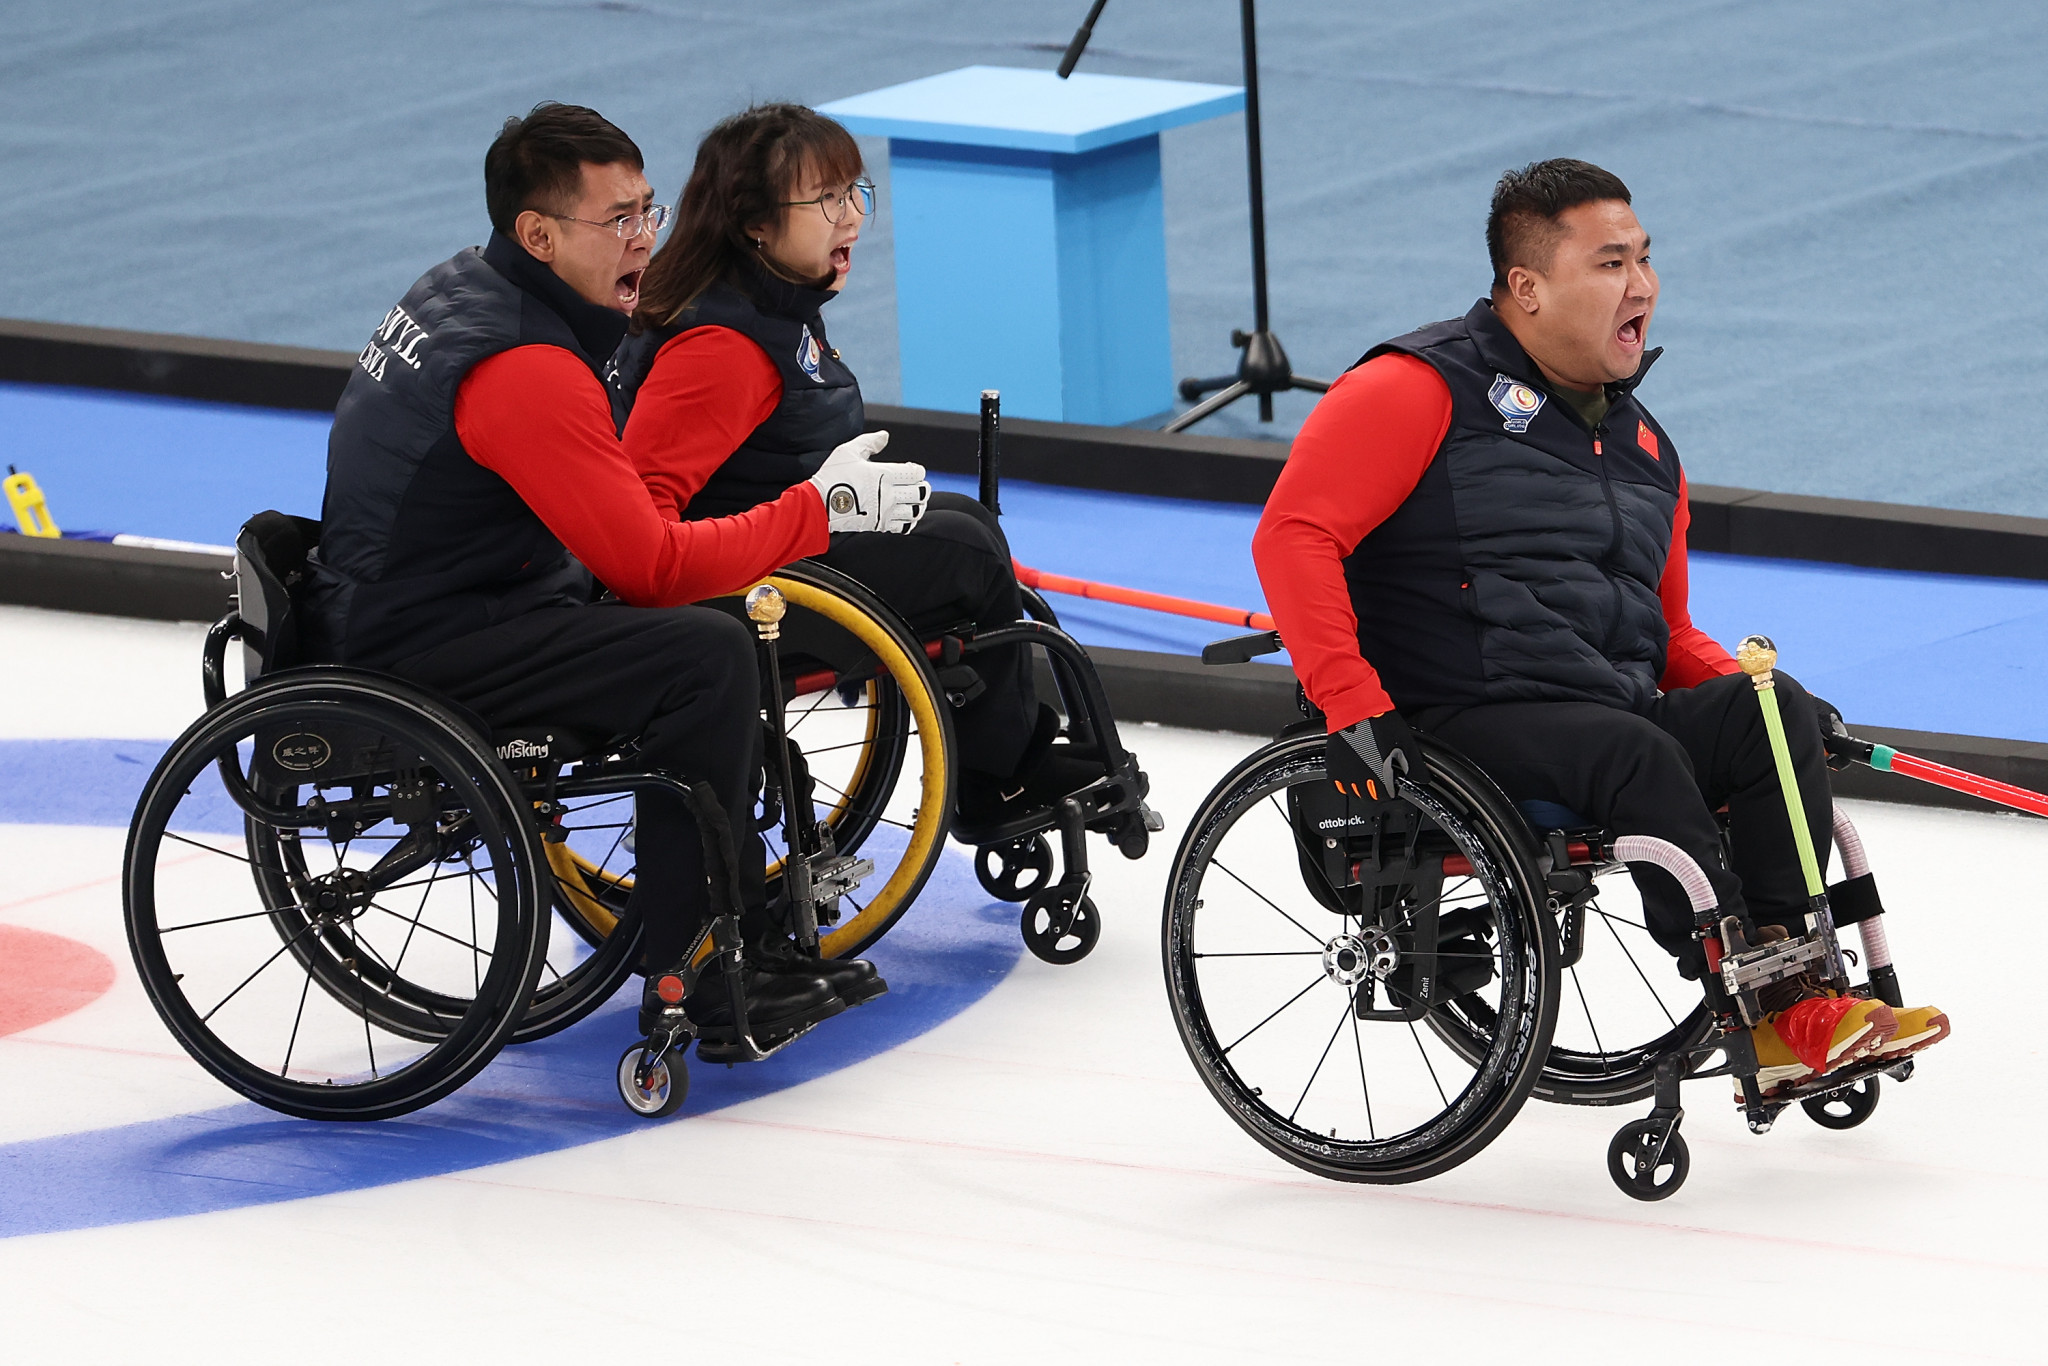 Defending champions China record first wheelchair curling win at Beijing 2022